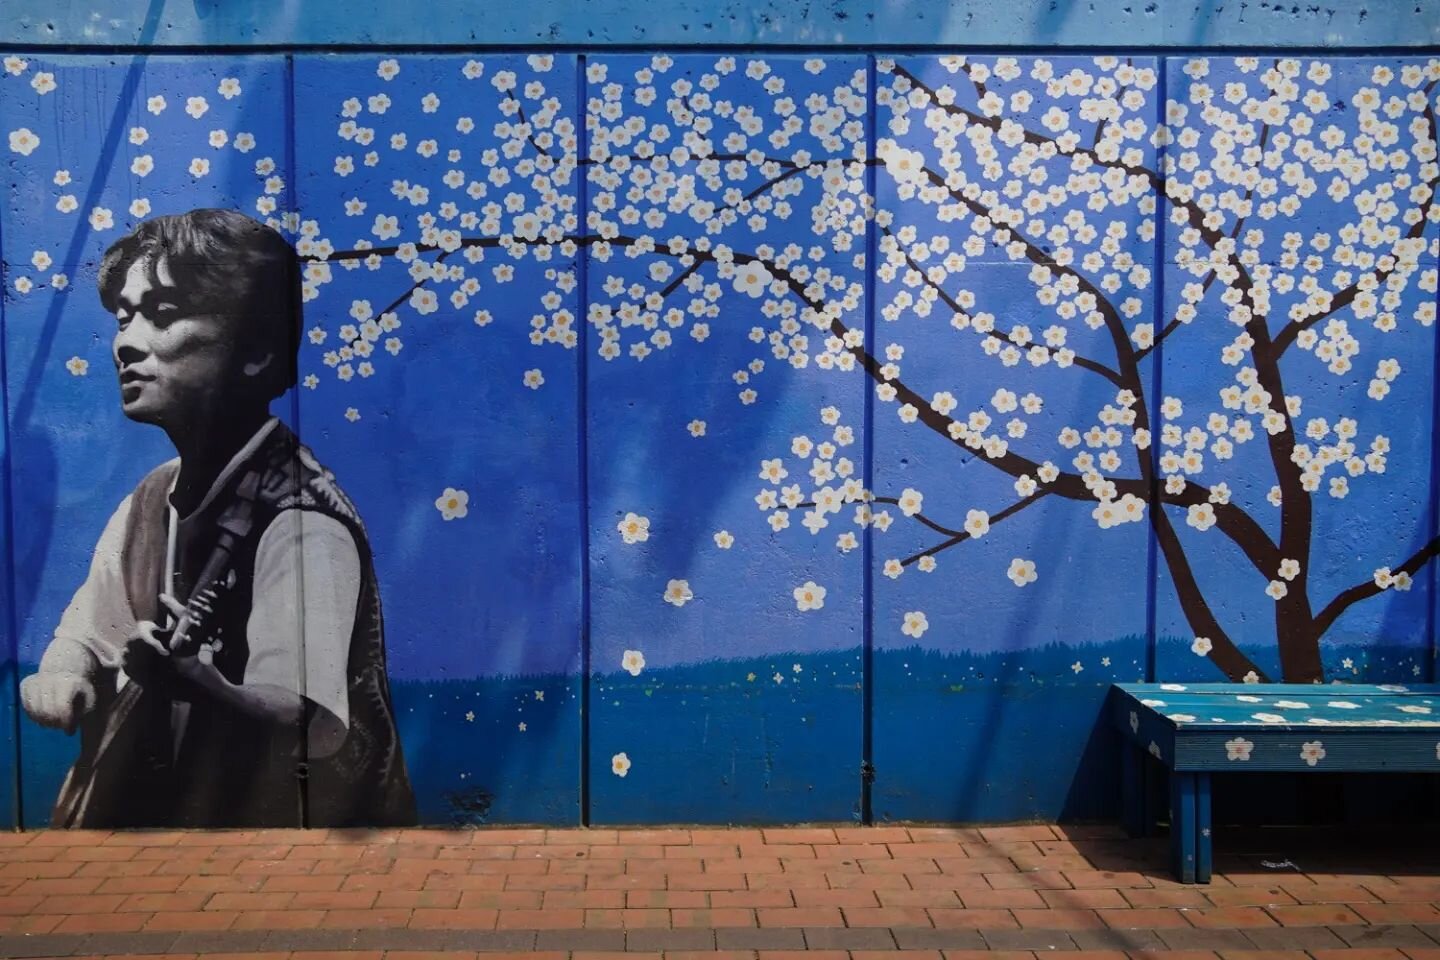 Kim Kwang-seok Road is an art and mural street in Daegu, South Korea dedicated to the incredibly successful and influential folk singer, Kim Kwang-seok. Kim became famous in the late 80s/early 90s for his songs which underlined the Korean people's co